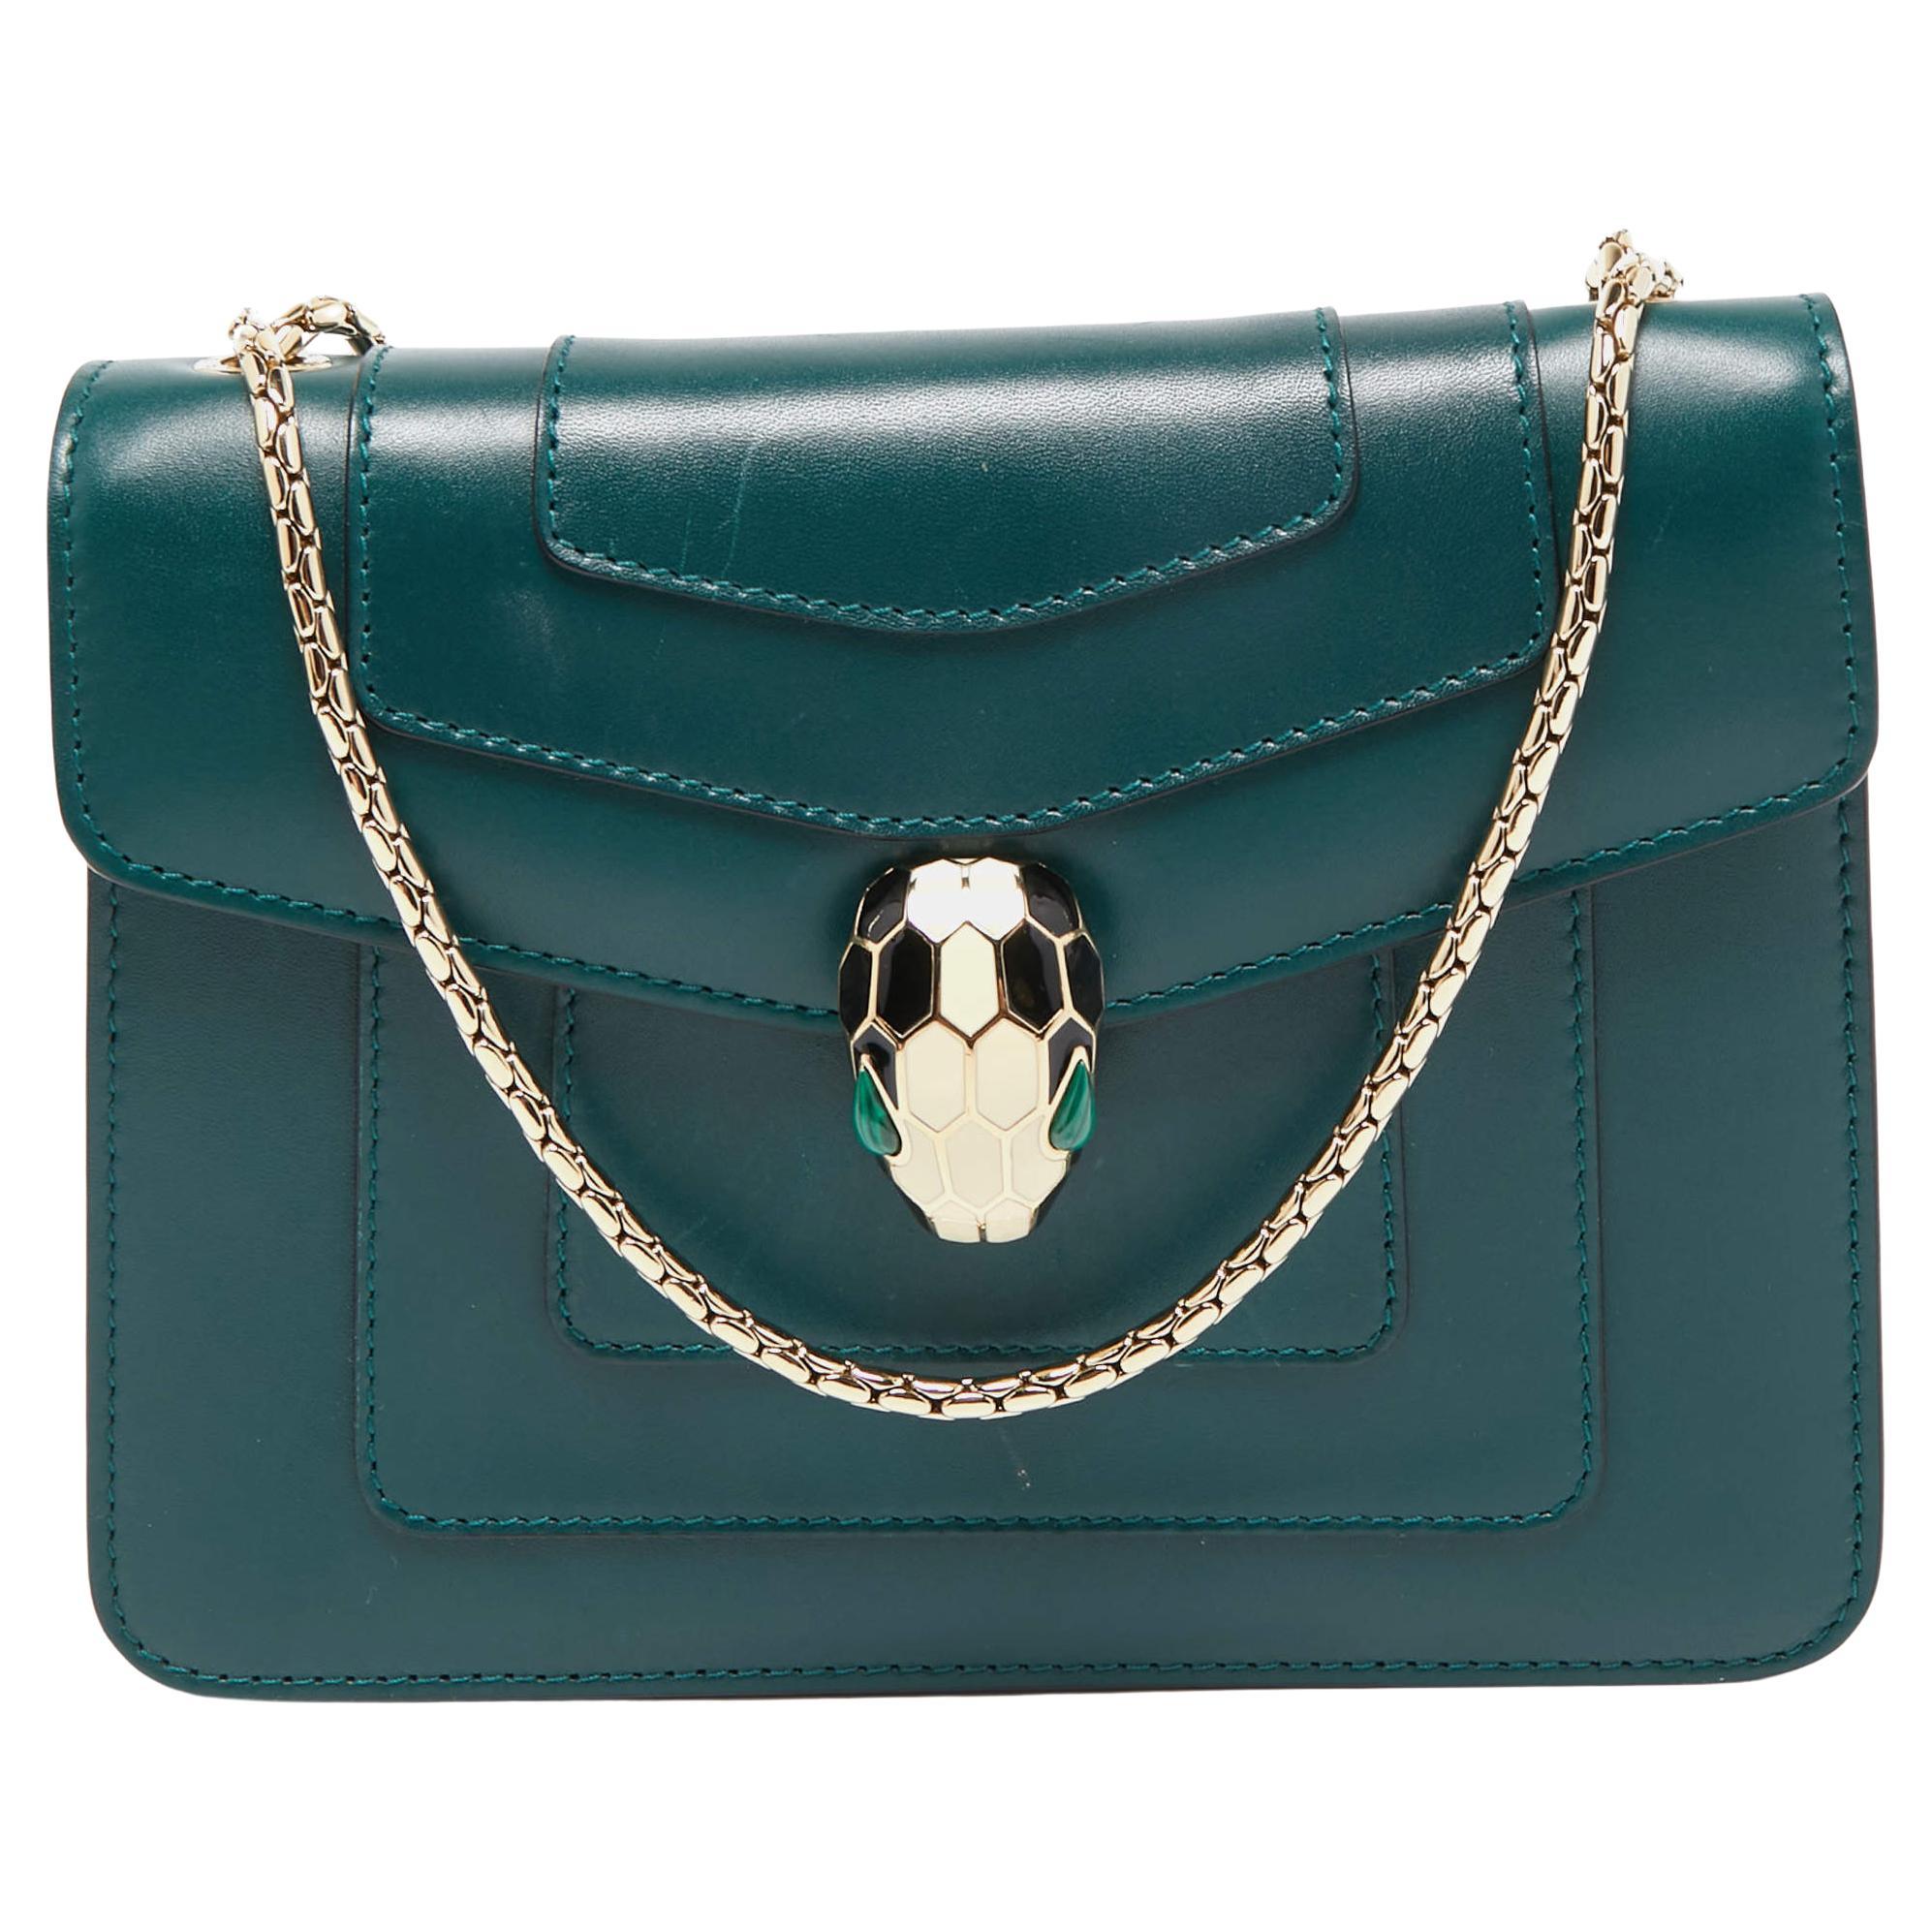 Bvlgari Women's Serpenti Forever Leather Shoulder Bag - Emerald Green One-Size